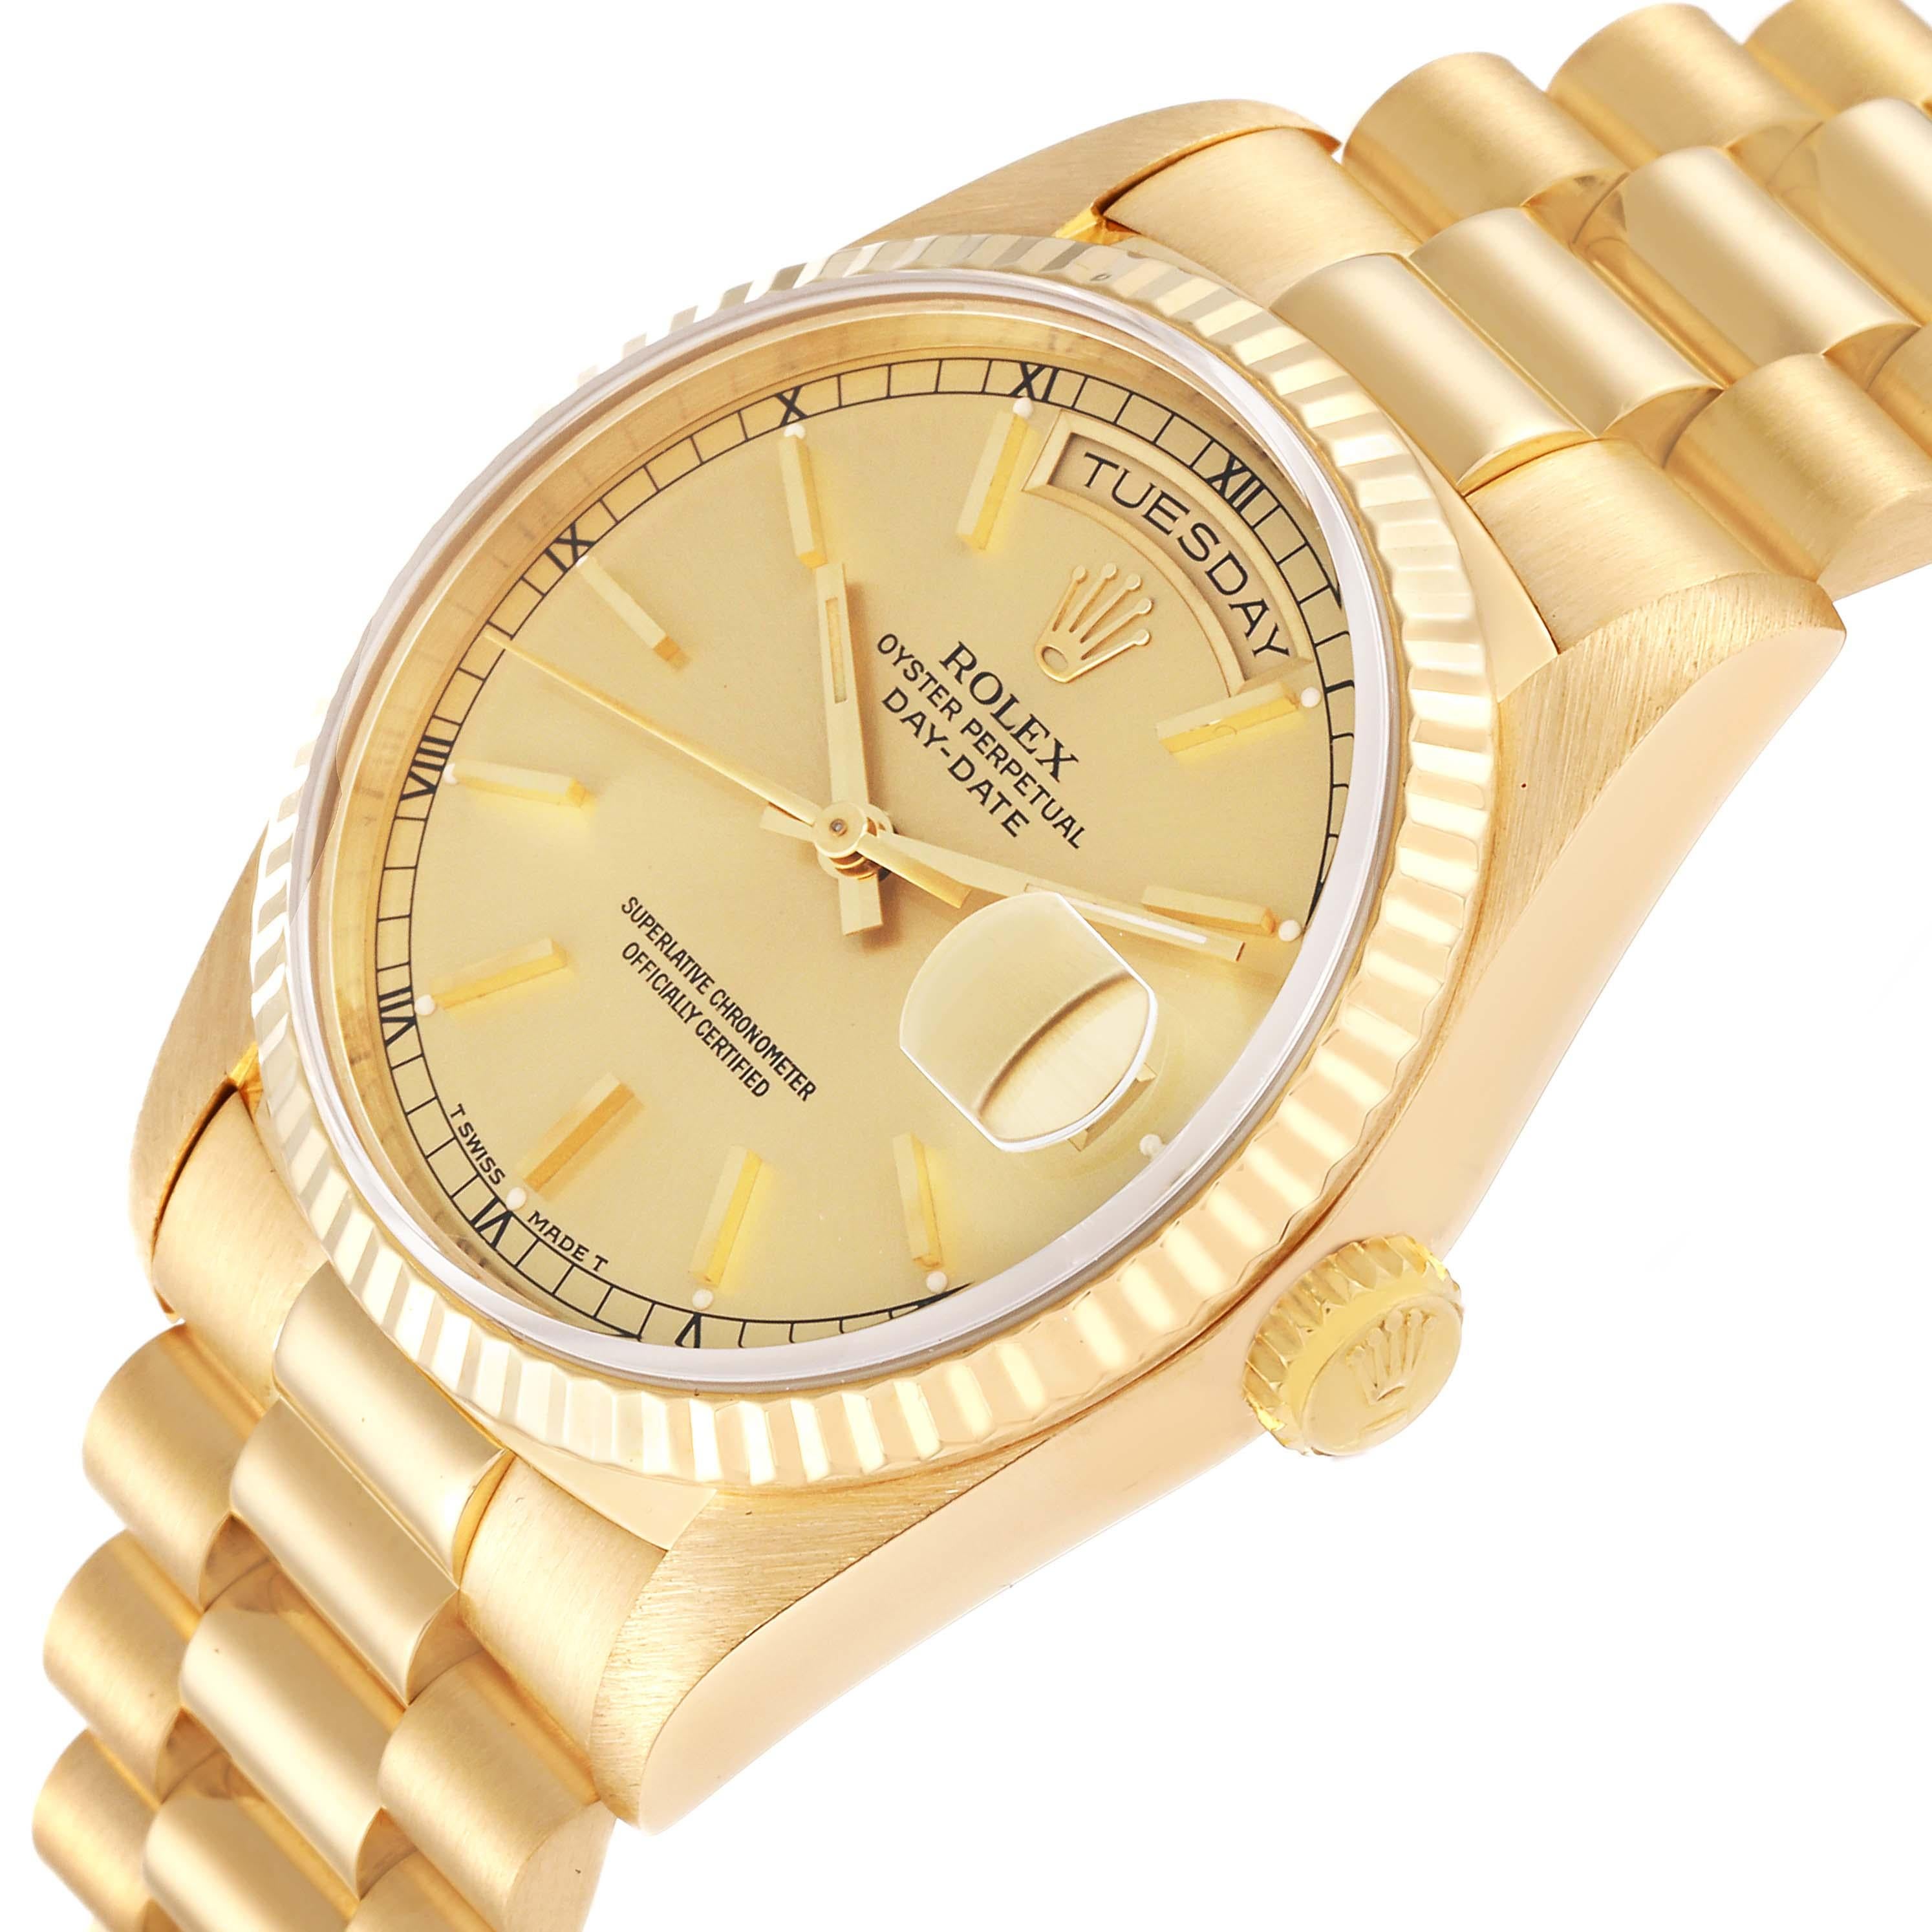 Rolex President Day-Date Yellow Gold Champagne Dial Mens Watch 18238 For Sale 5